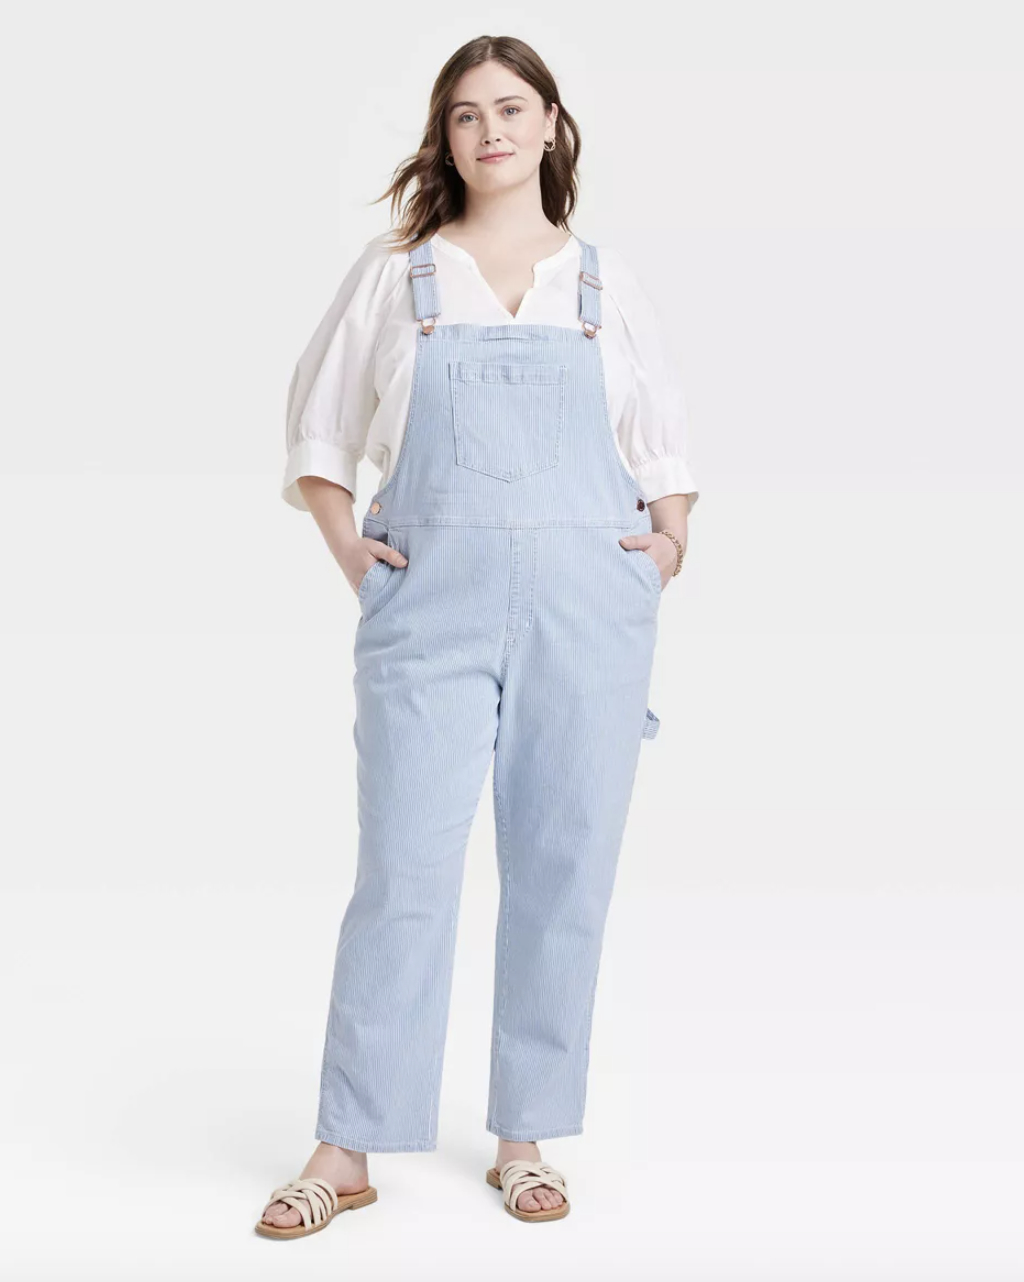 A pair of light wash overalls